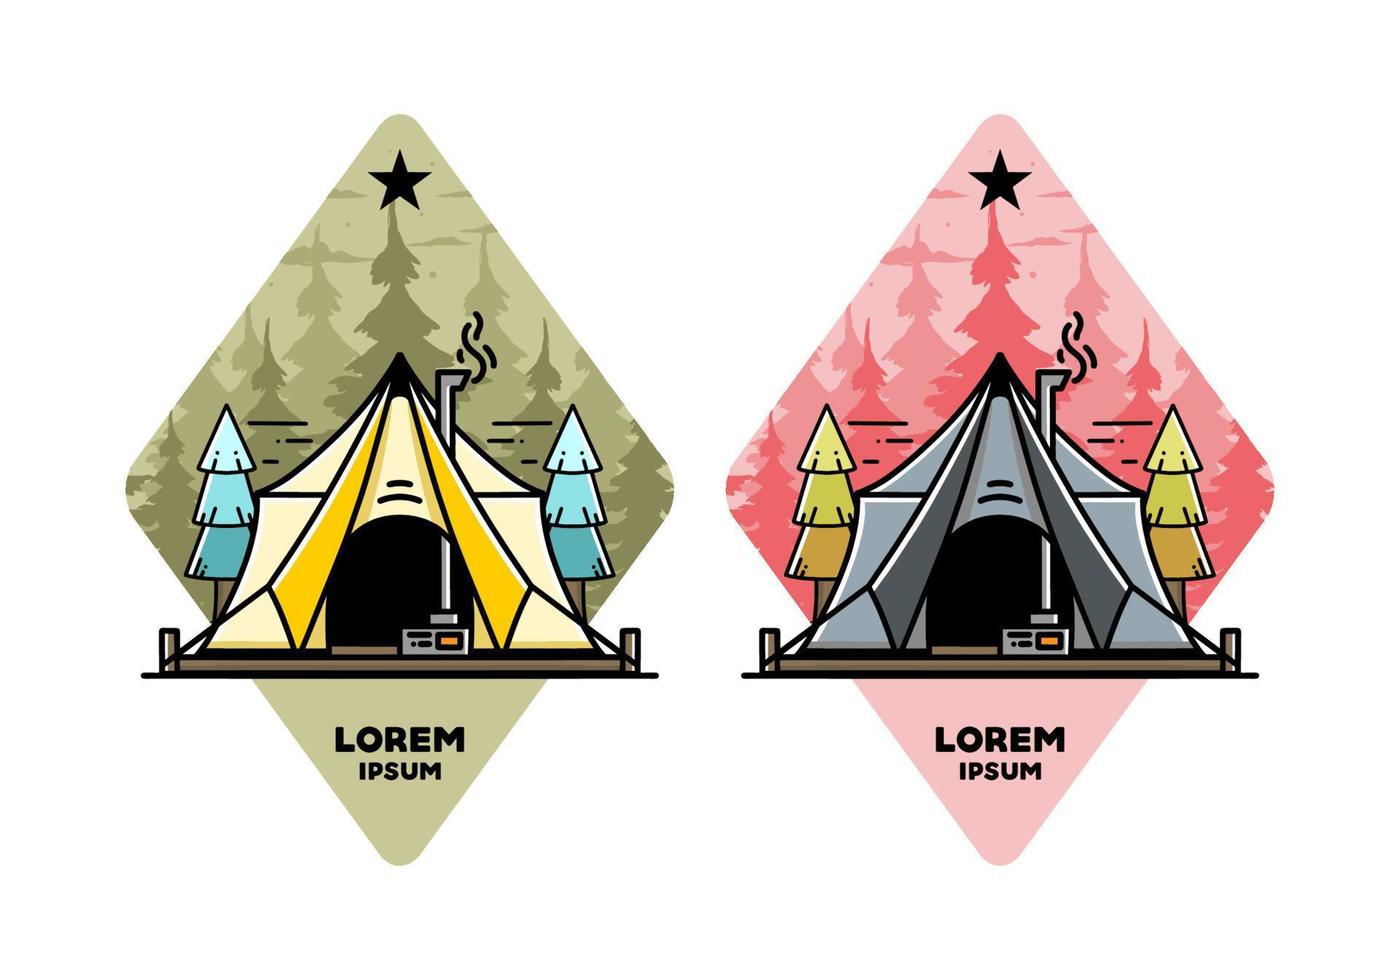 Large glamping tent with heater and chimney illustration design vector